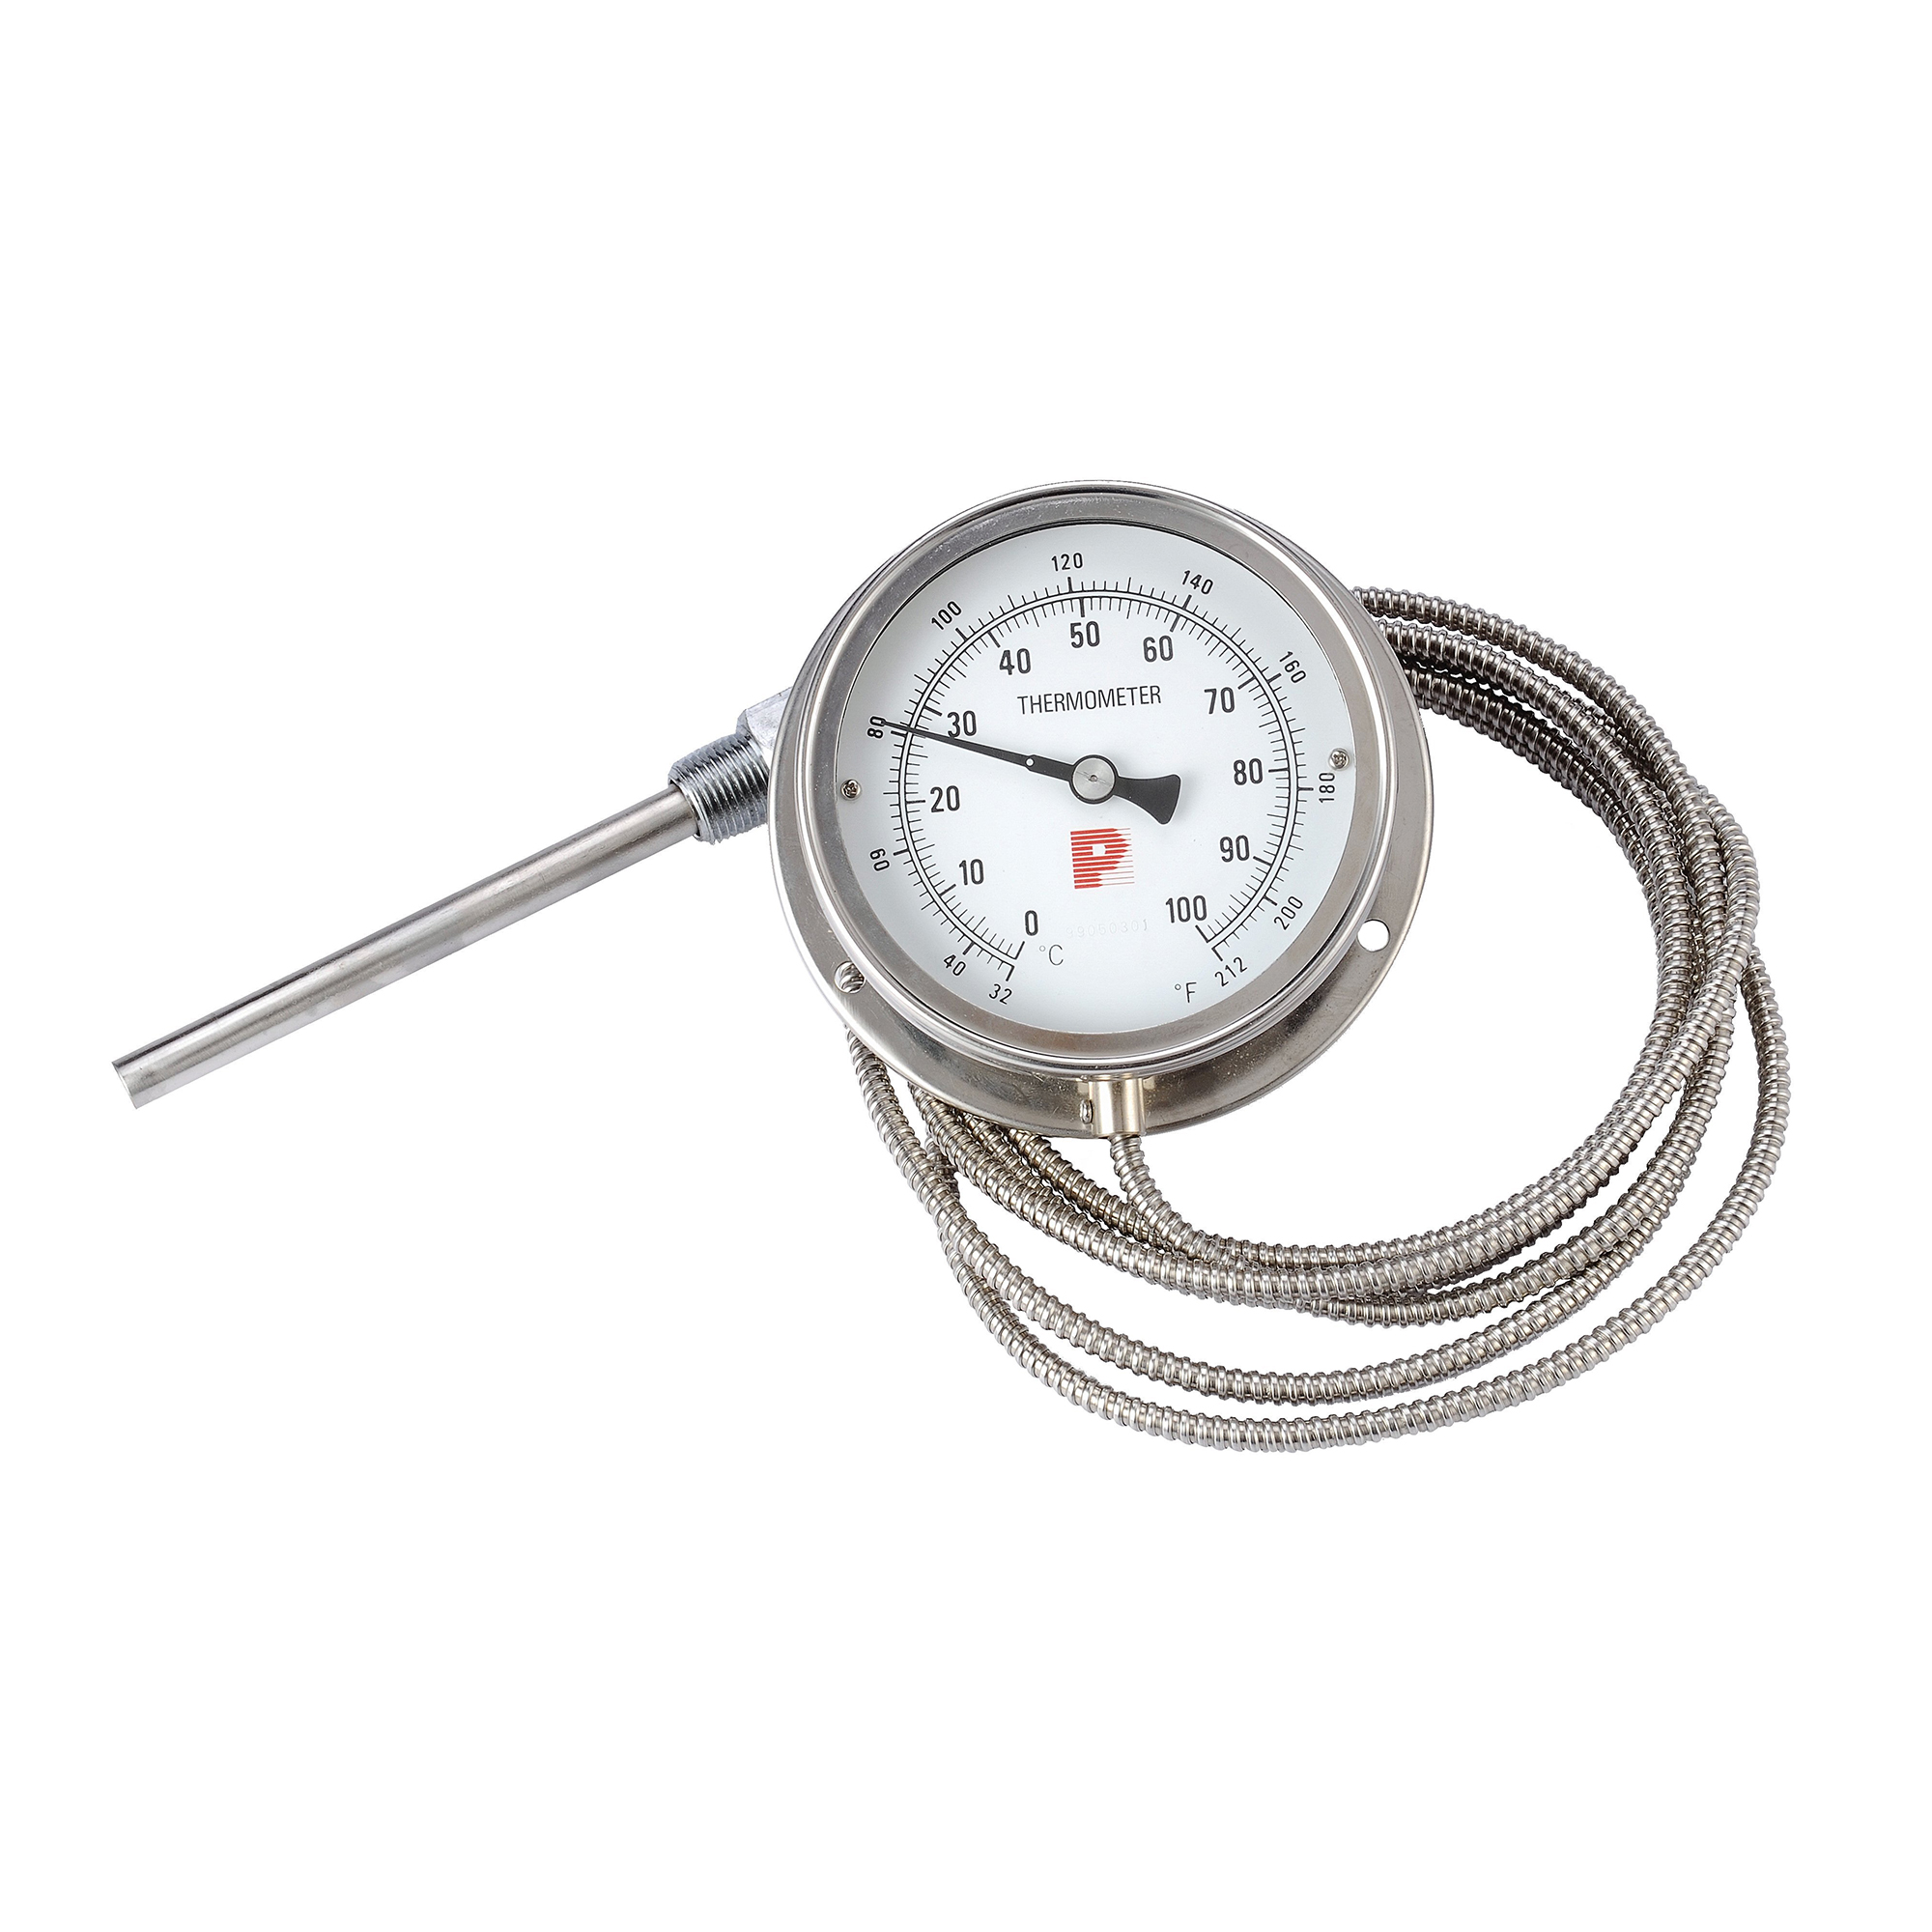 Stainless steel capillary thermometer, C200 SERIES